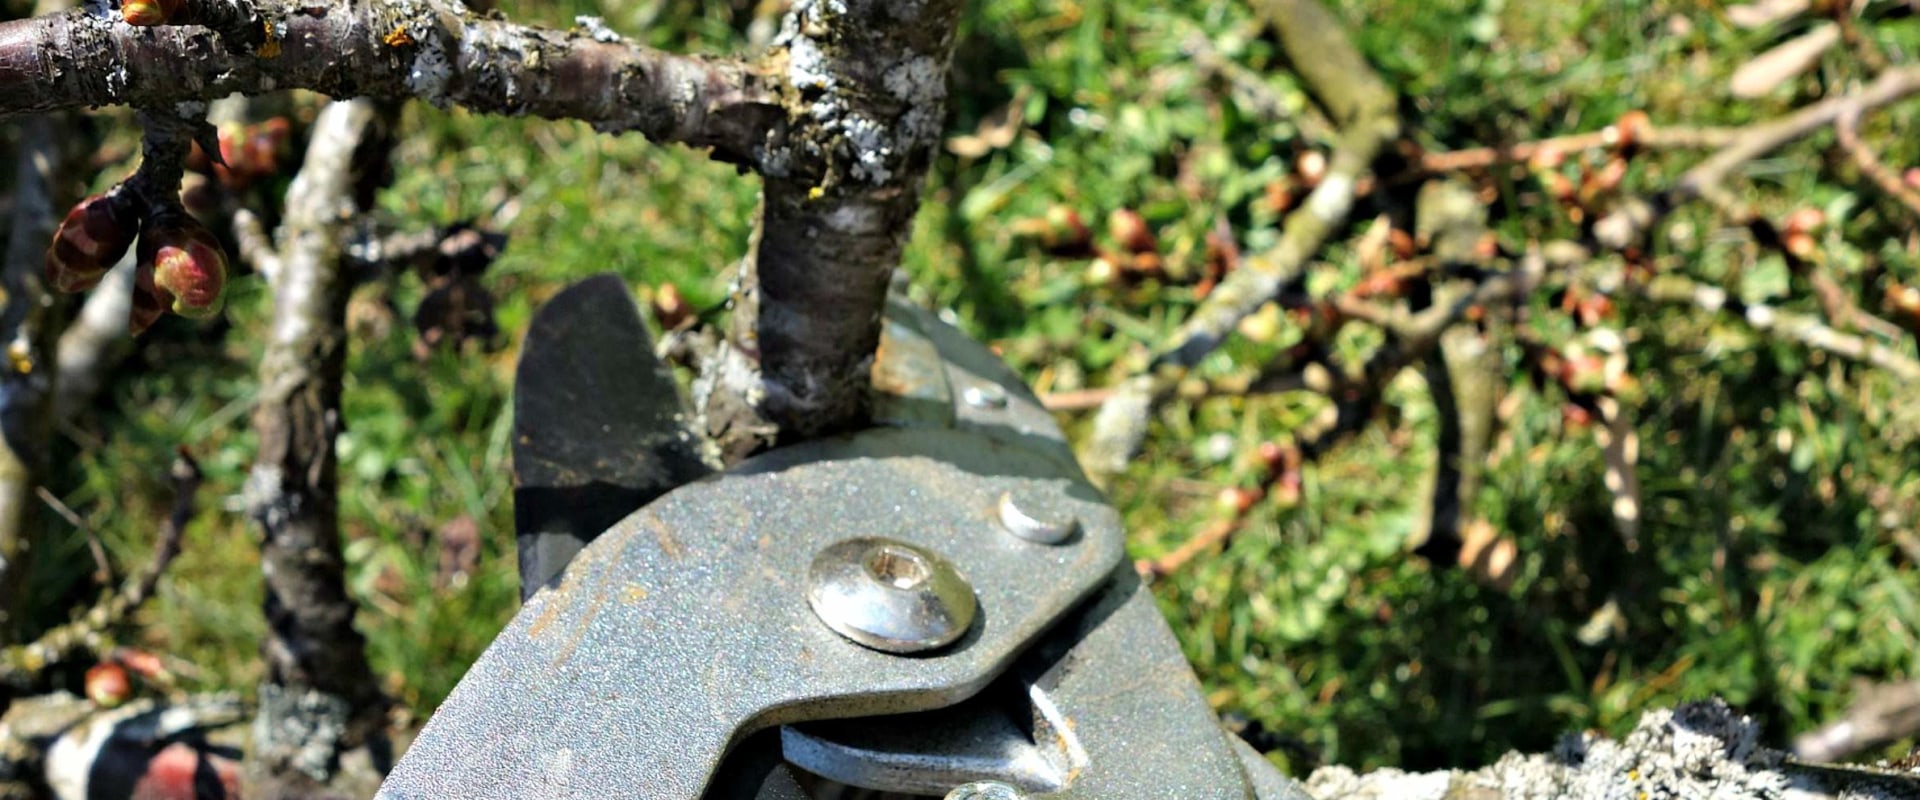 The Benefits of Pruning Trees: How to Stimulate Growth and Improve Aesthetics